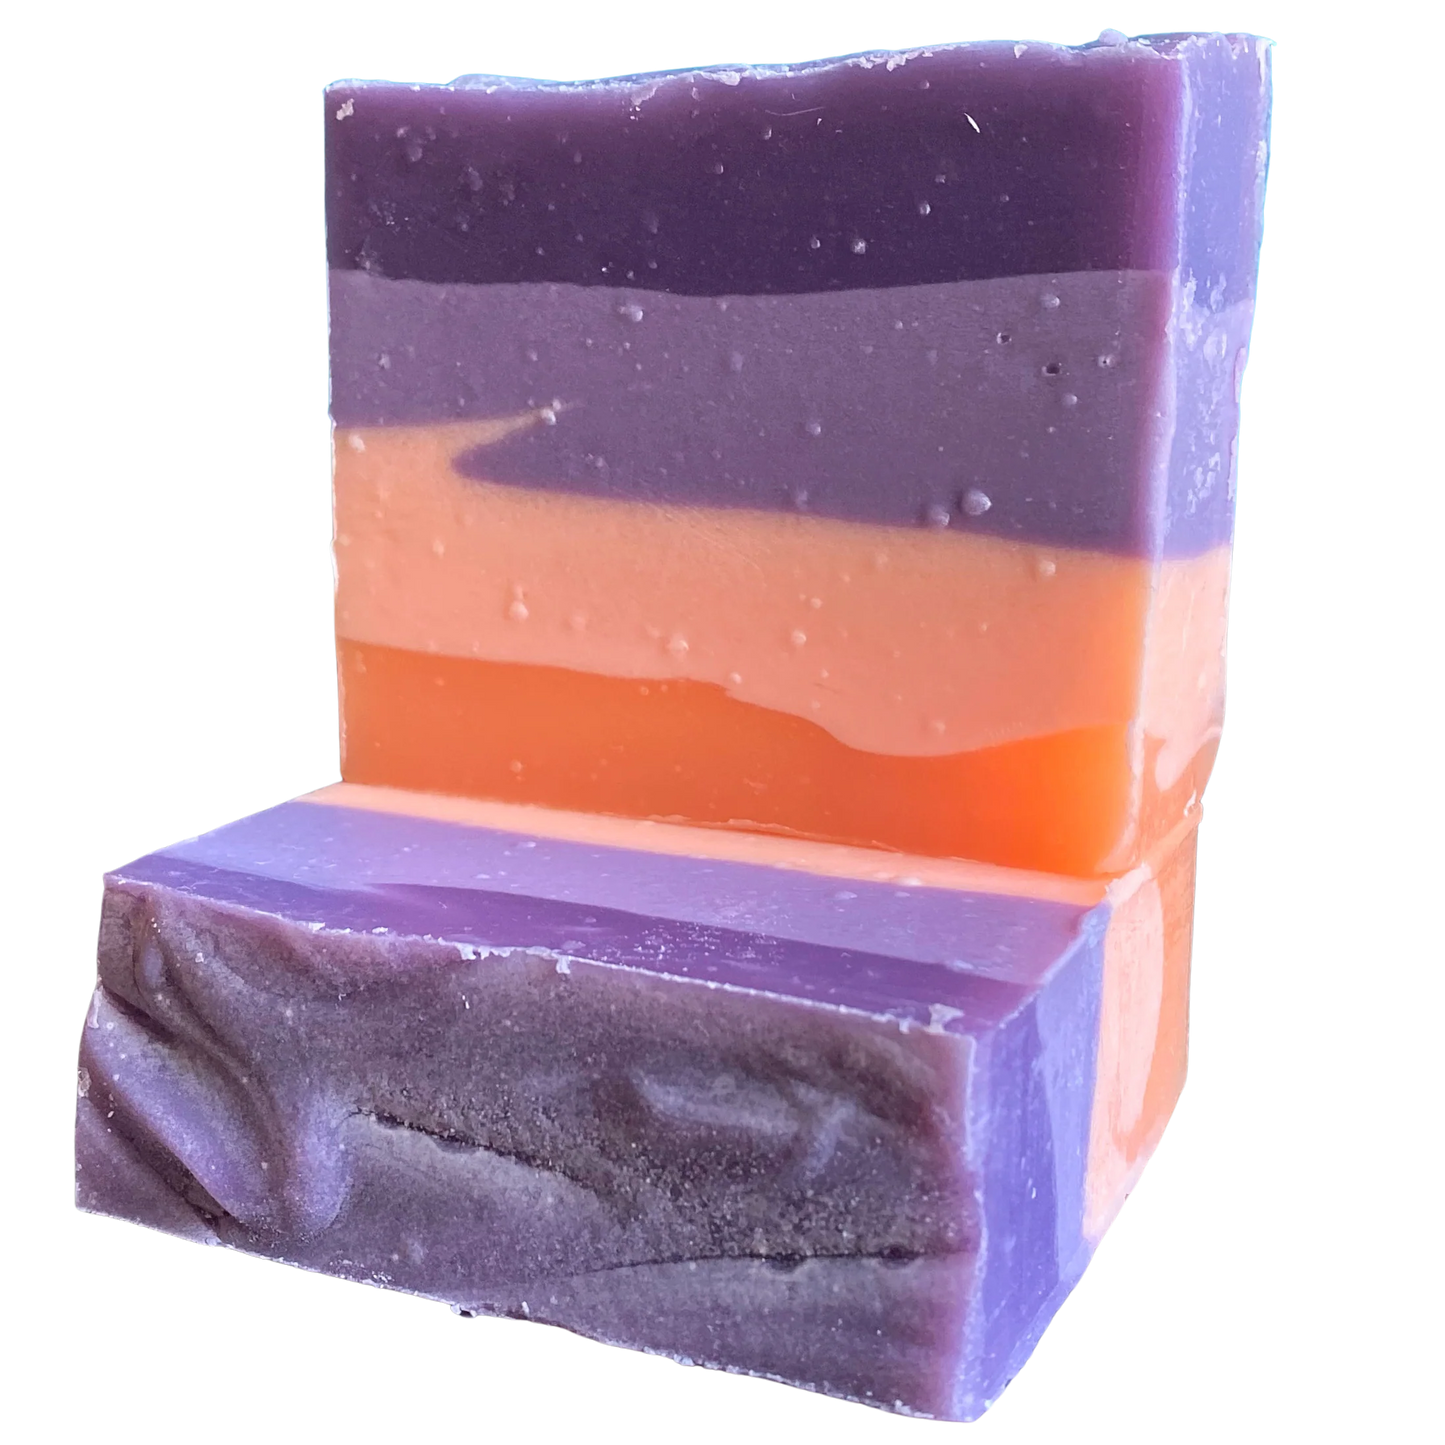 Tranquil Soap | lavender, cypress + amber